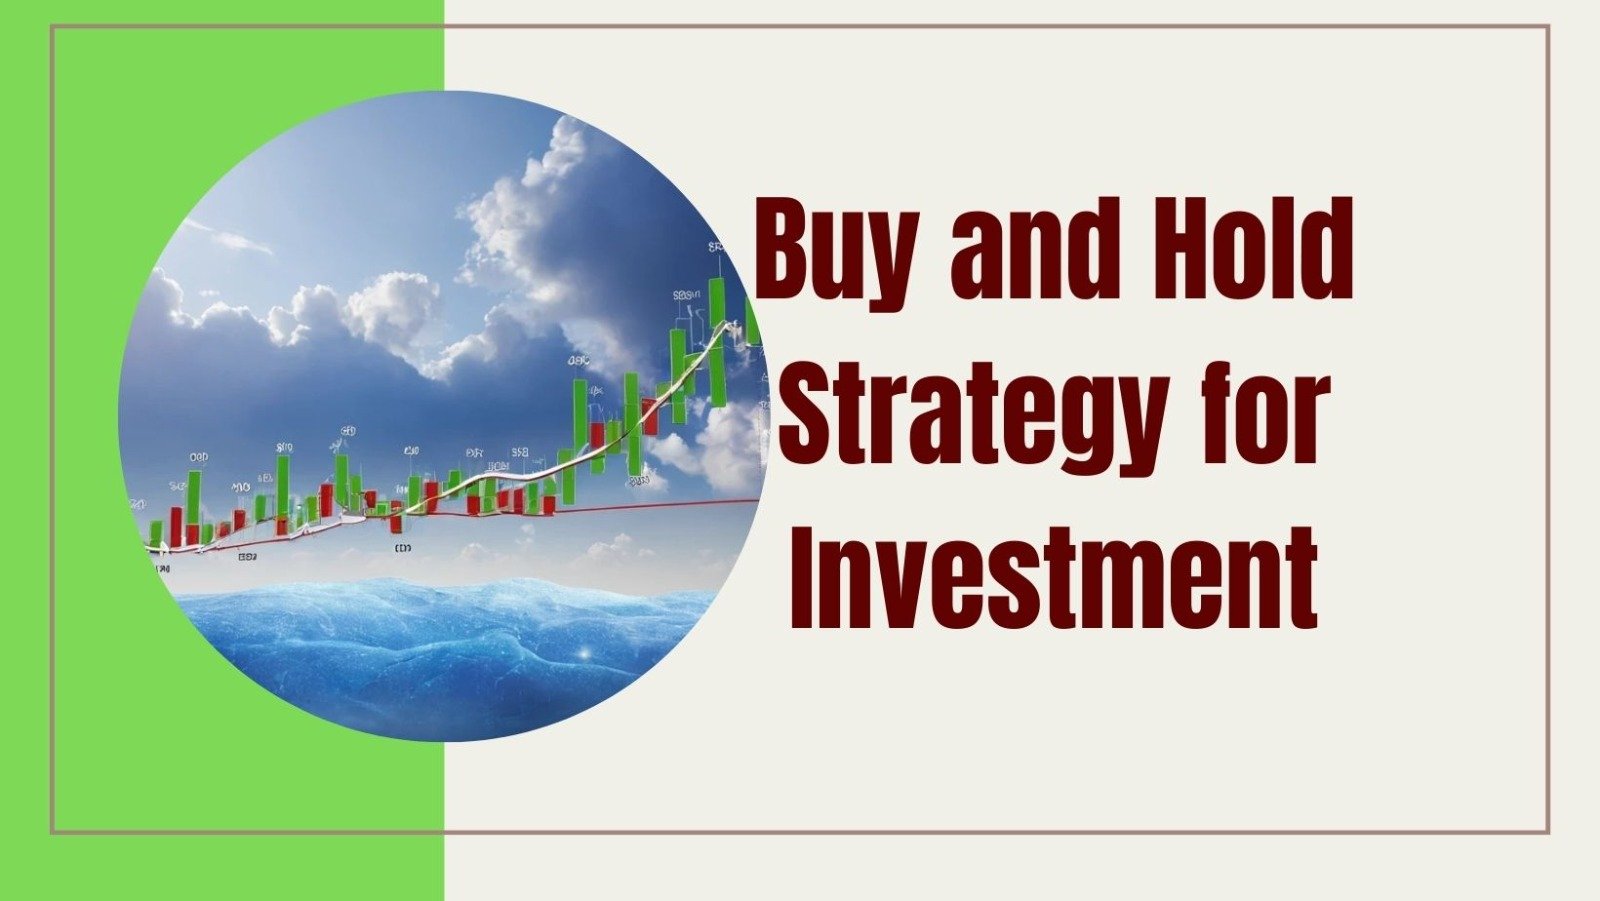 Is Buy and Hold the Best Strategy for Investment?